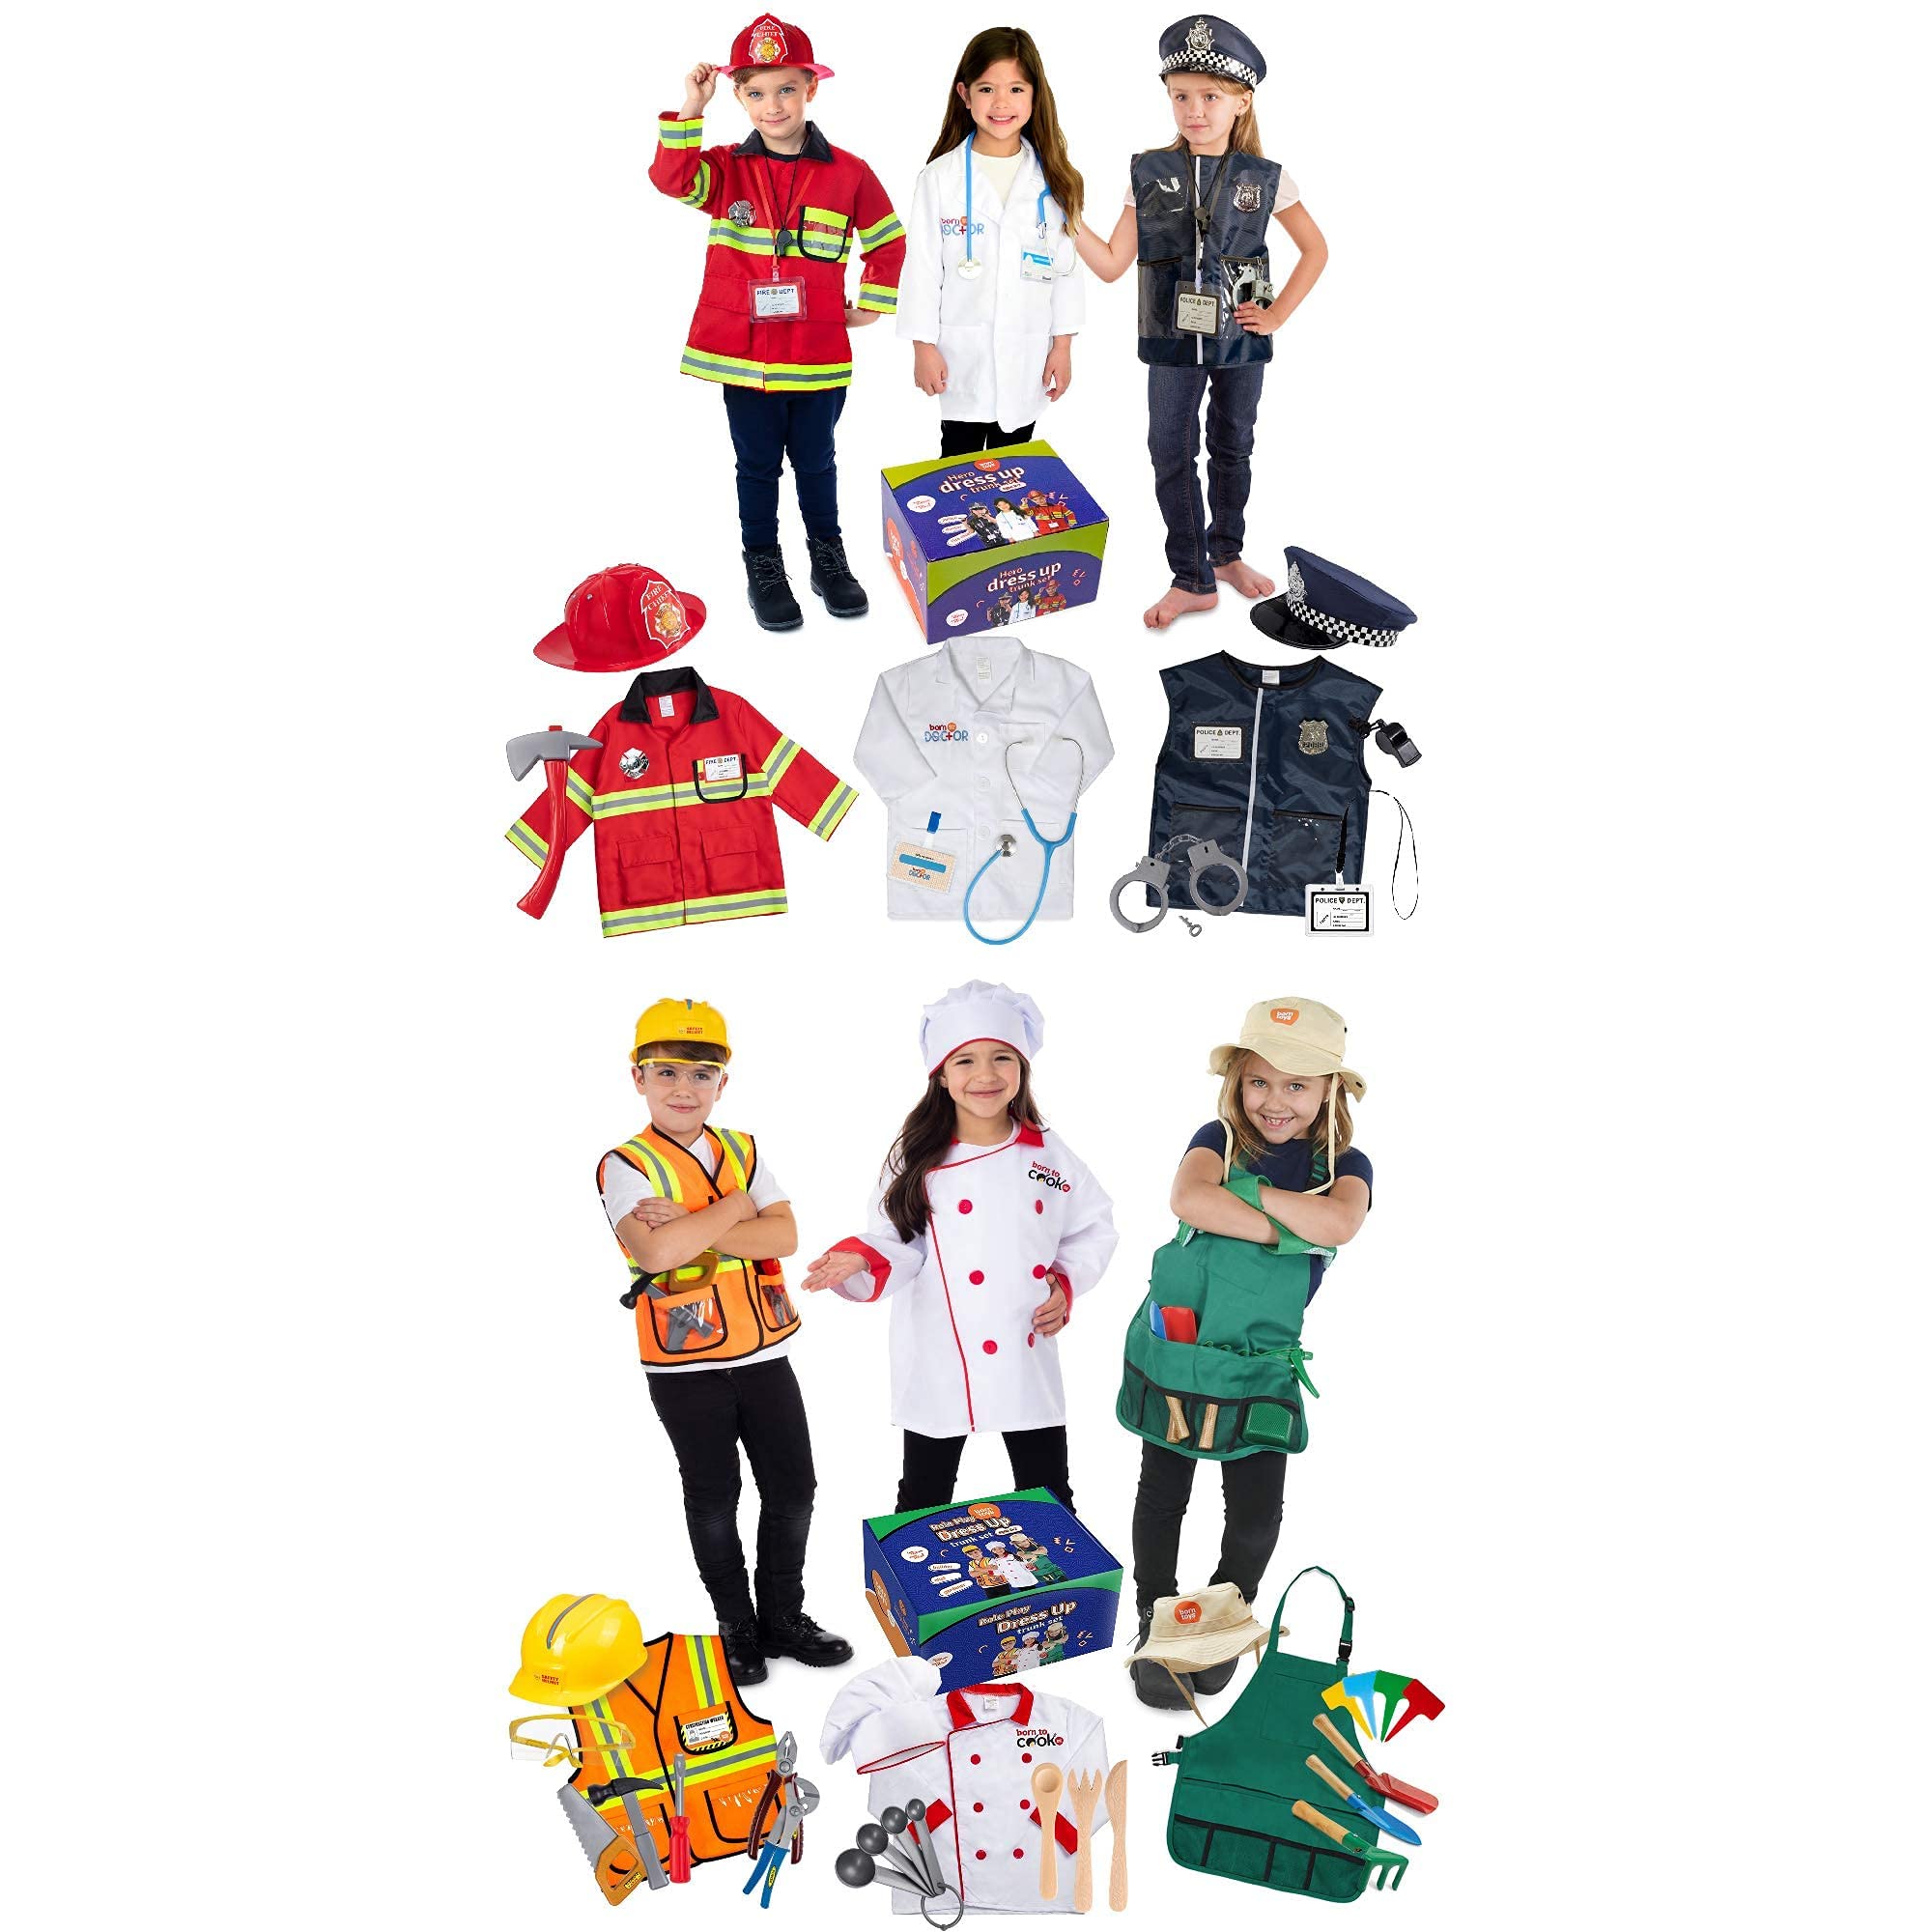 Born Toys Deluxe Premium Washable Hero and Dress up Trunk Set Bundle Includes Fireman,Policeman,Doctor,Construction worker,Gardener,Chef Costumes for Boys and Girls Ages 3-8